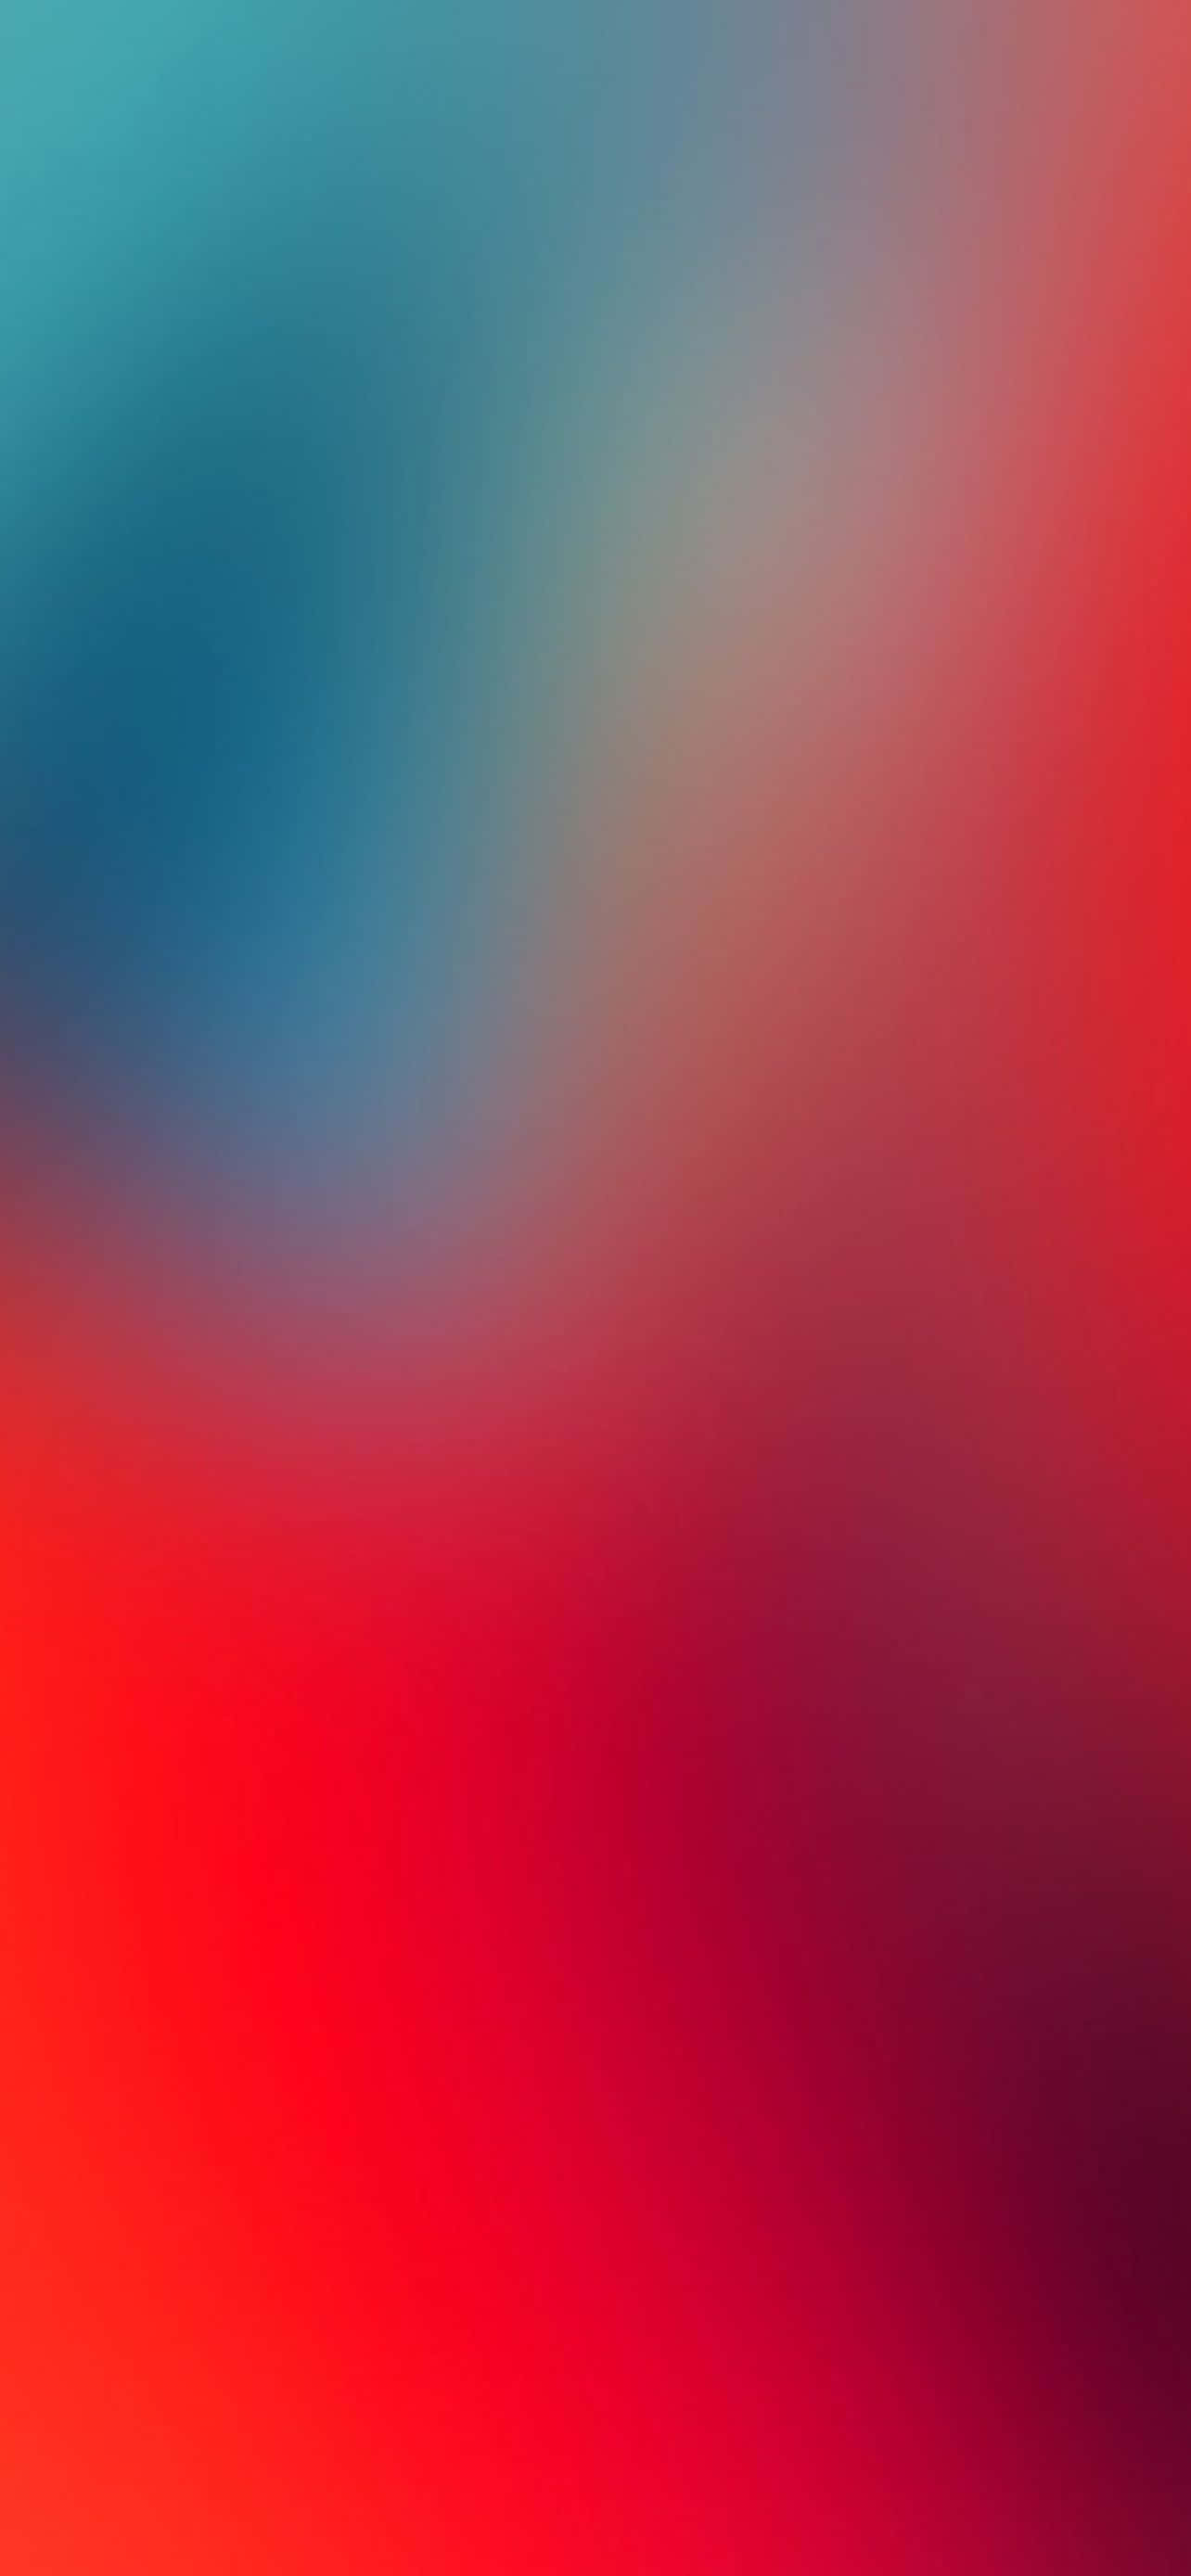 Download Iphone 12 Pro Max Background | Wallpapers.com